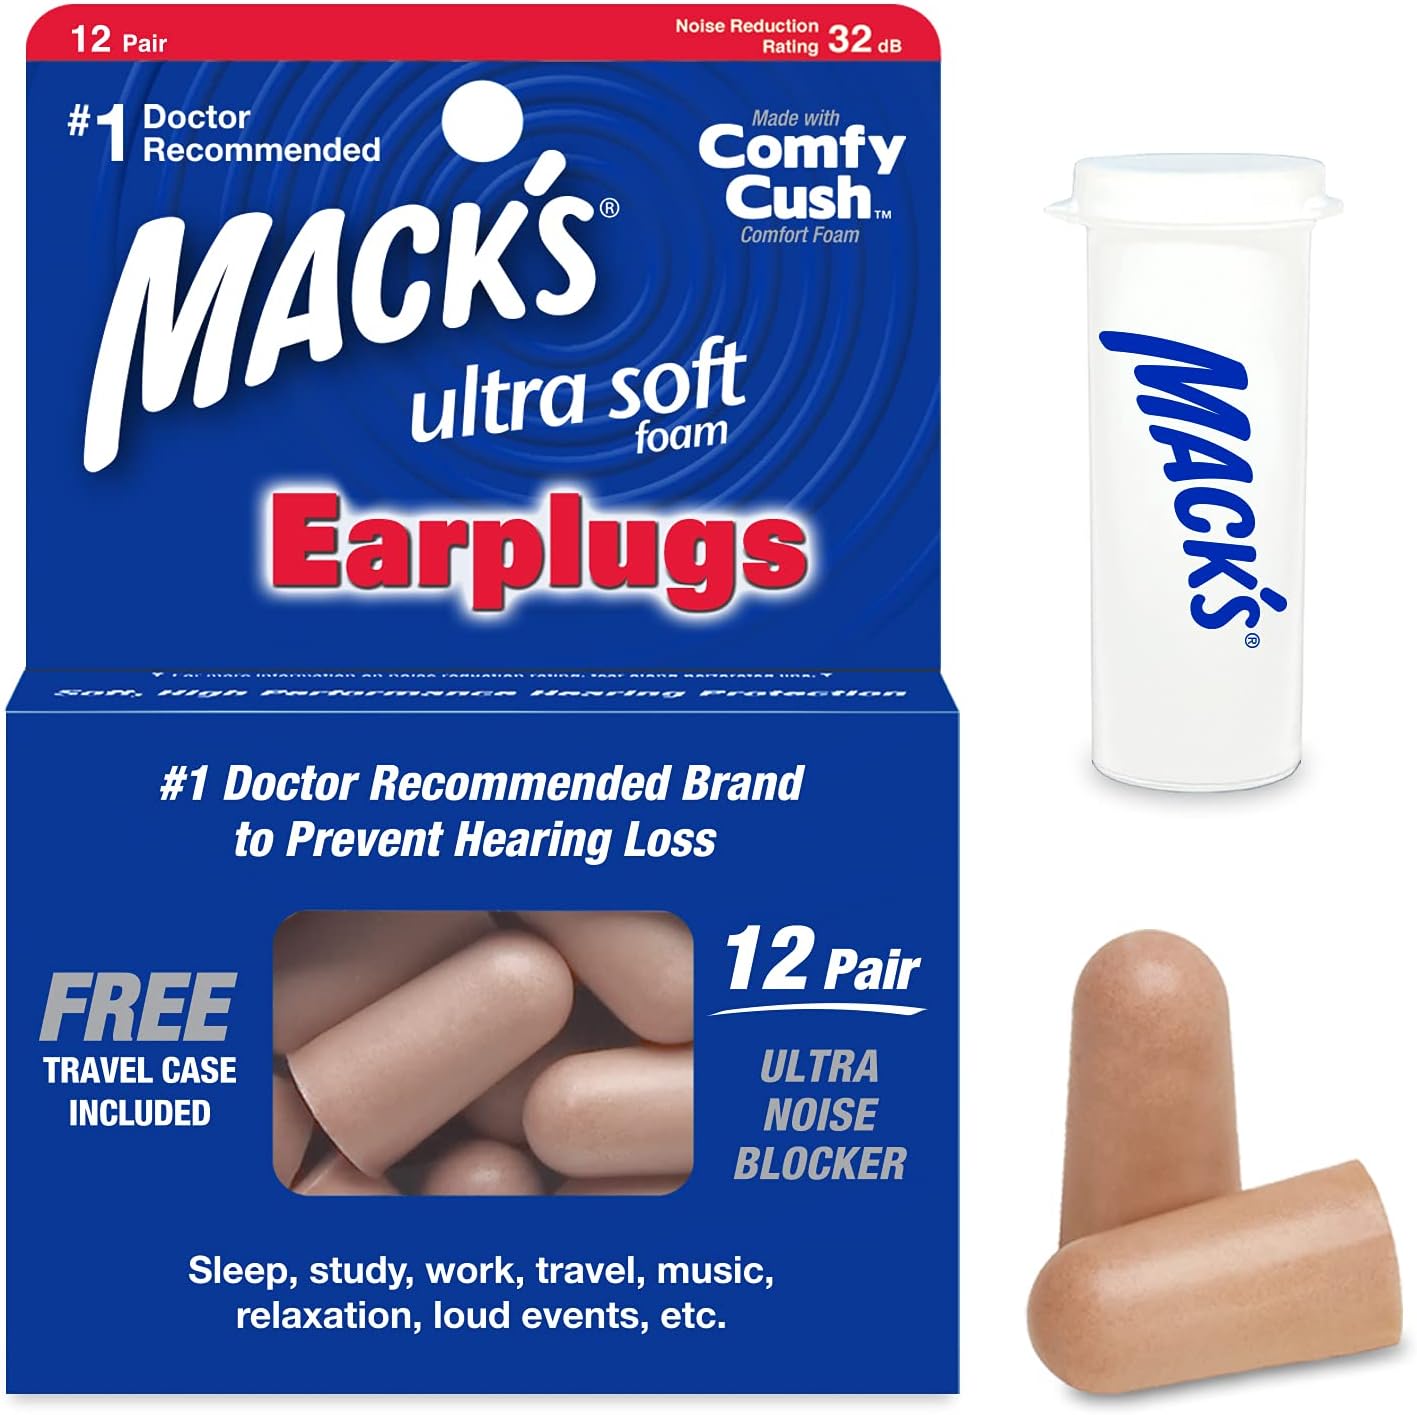 Mack's Ultra Soft Foam Earplugs, 12 Pair - 32dB Highest NRR, Comfortable Ear Plugs for Sleeping, Snoring, Travel, Concerts, Studying, Loud Noise, Work | Made in USA